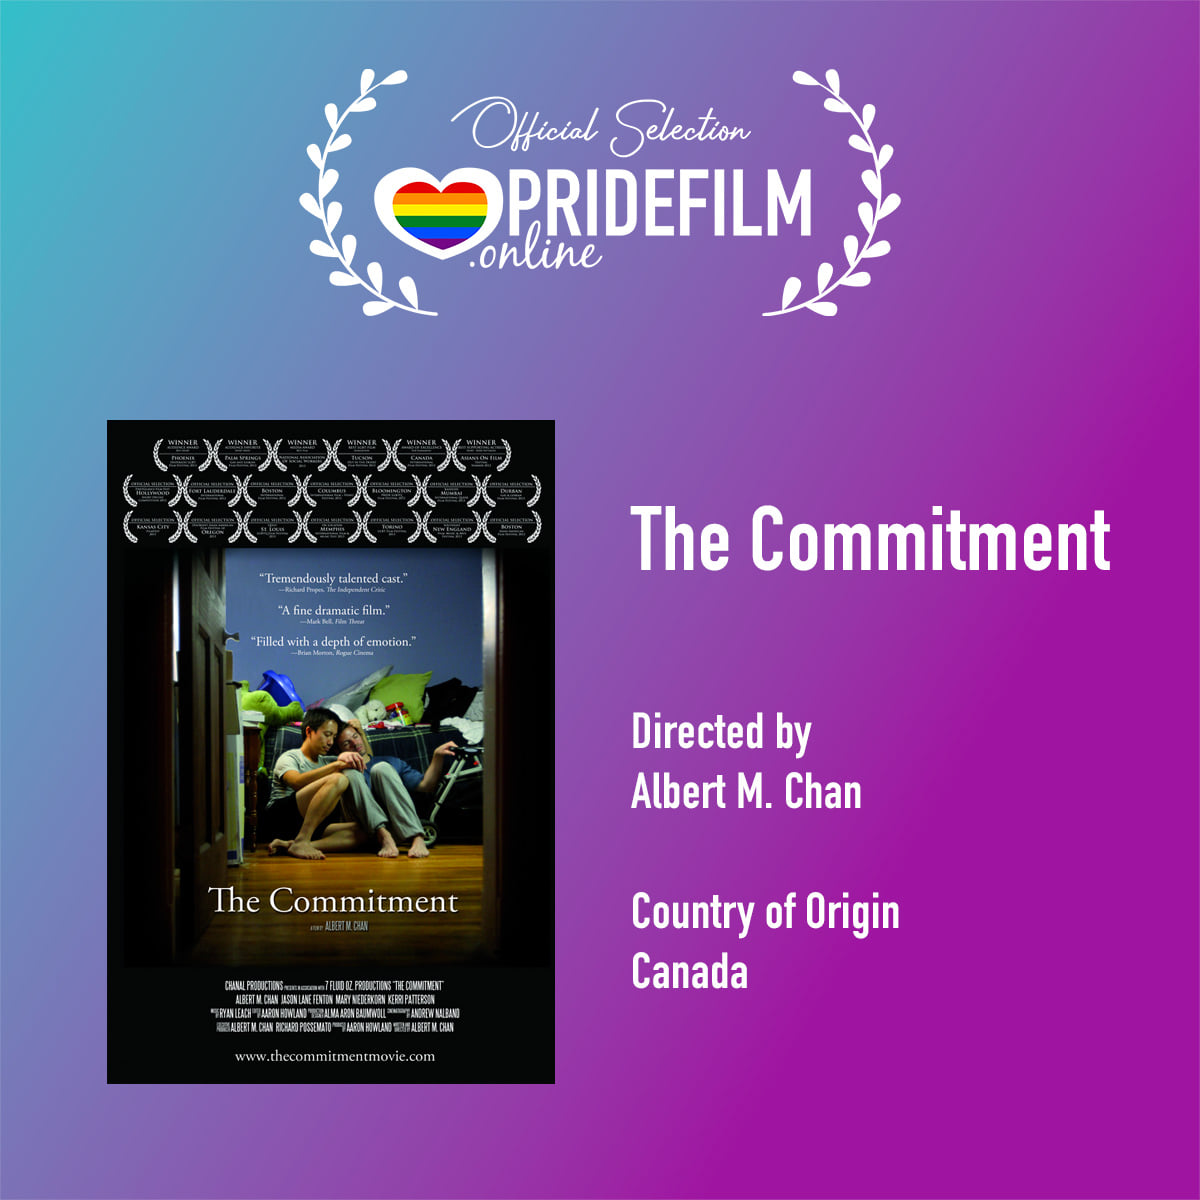 THE COMMITMENT Wins Honorable Mention at PRIDEFILM.online in Ukraine